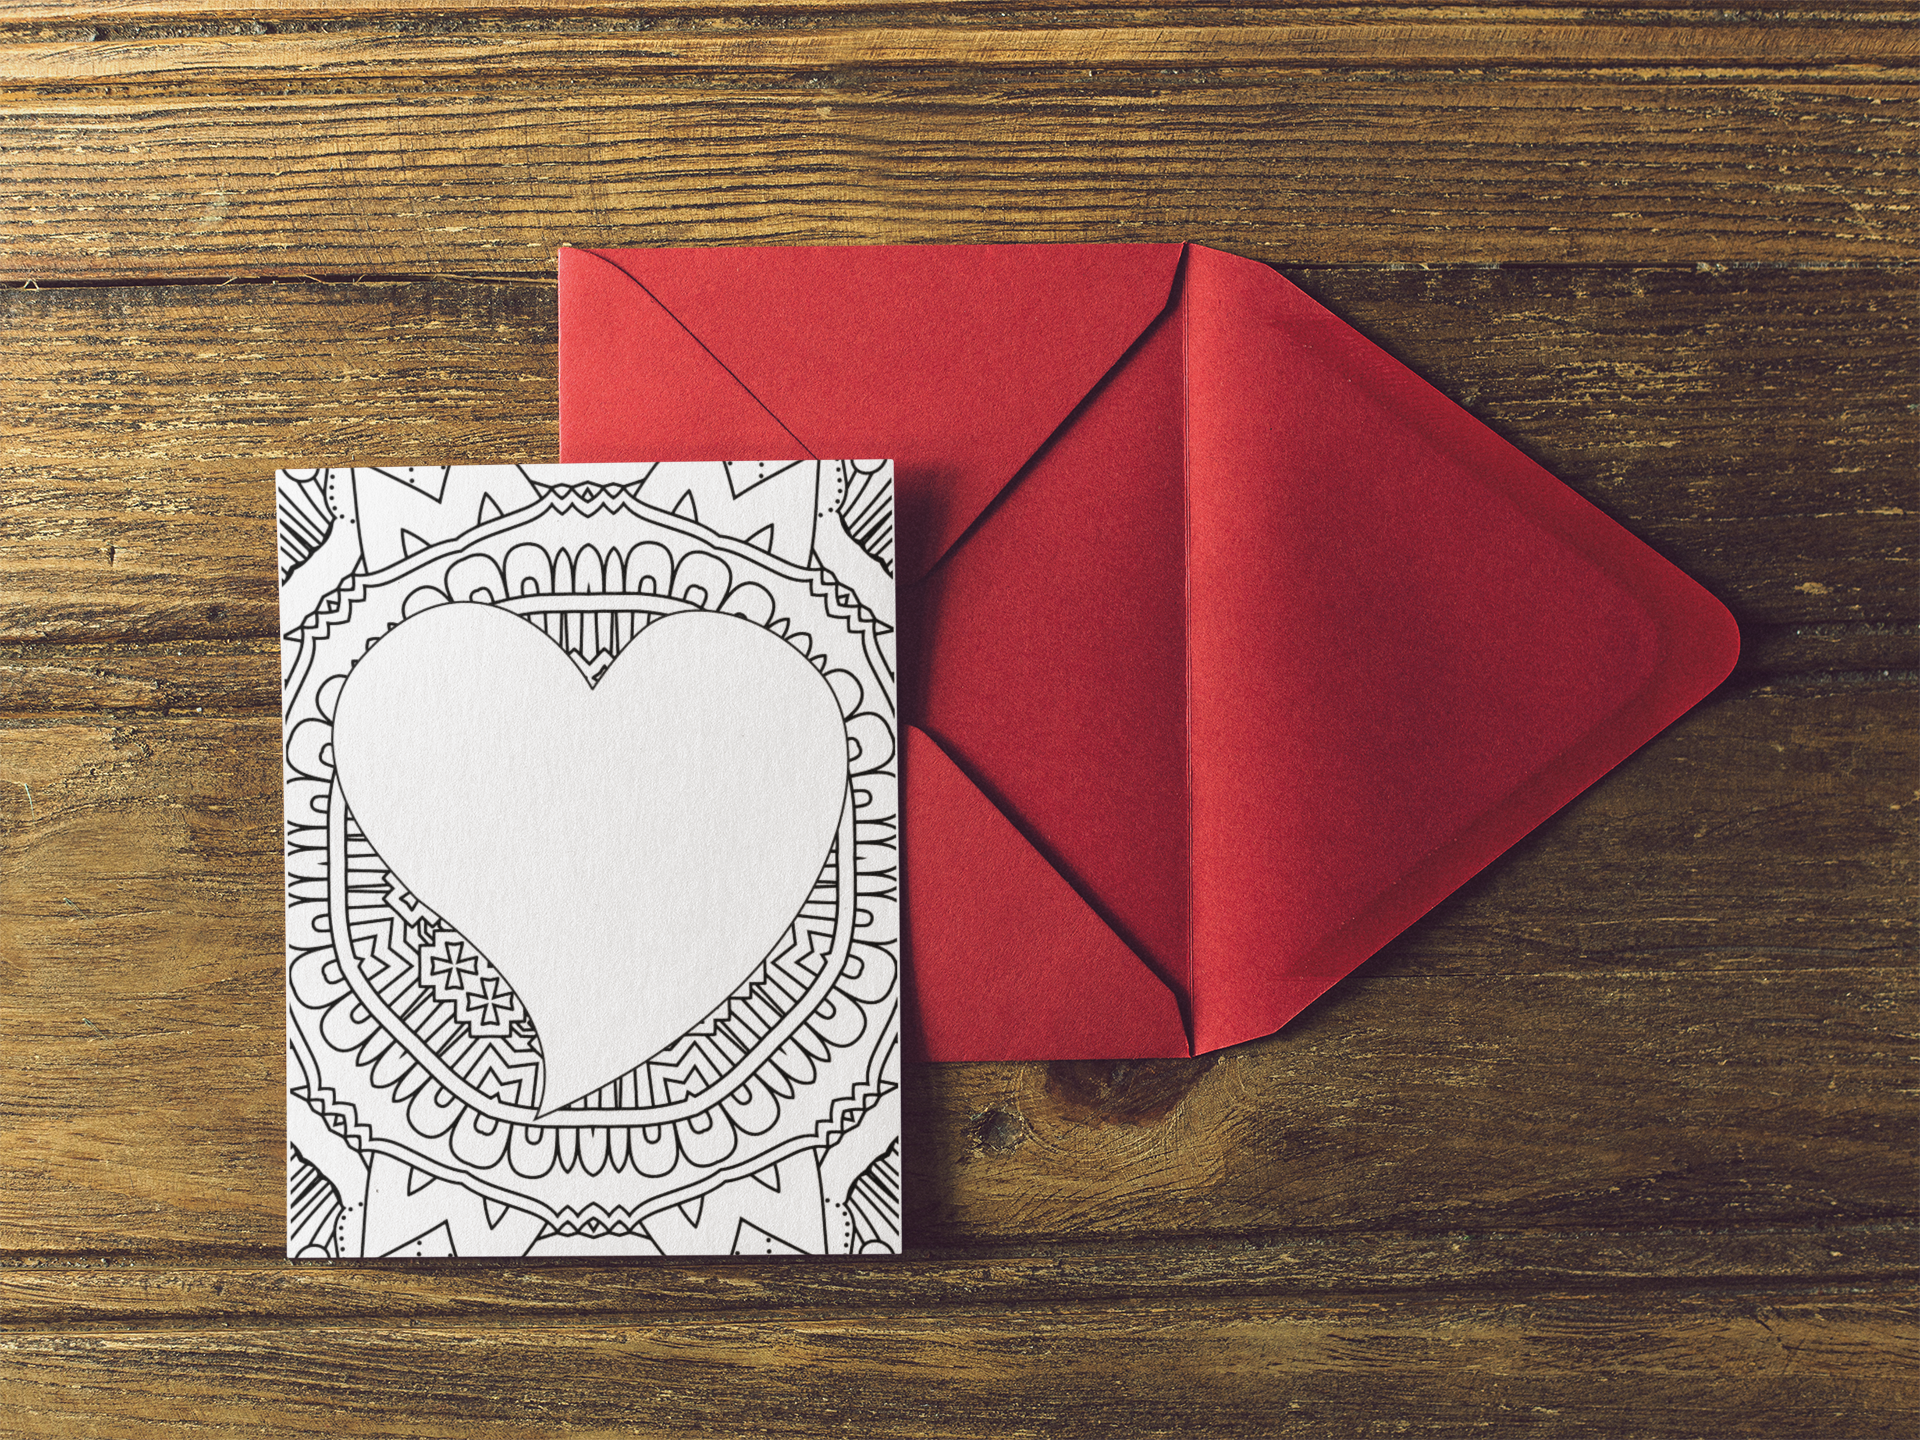 valentines-card-on-a-red-envelope-over-a-wooden-table-a14713